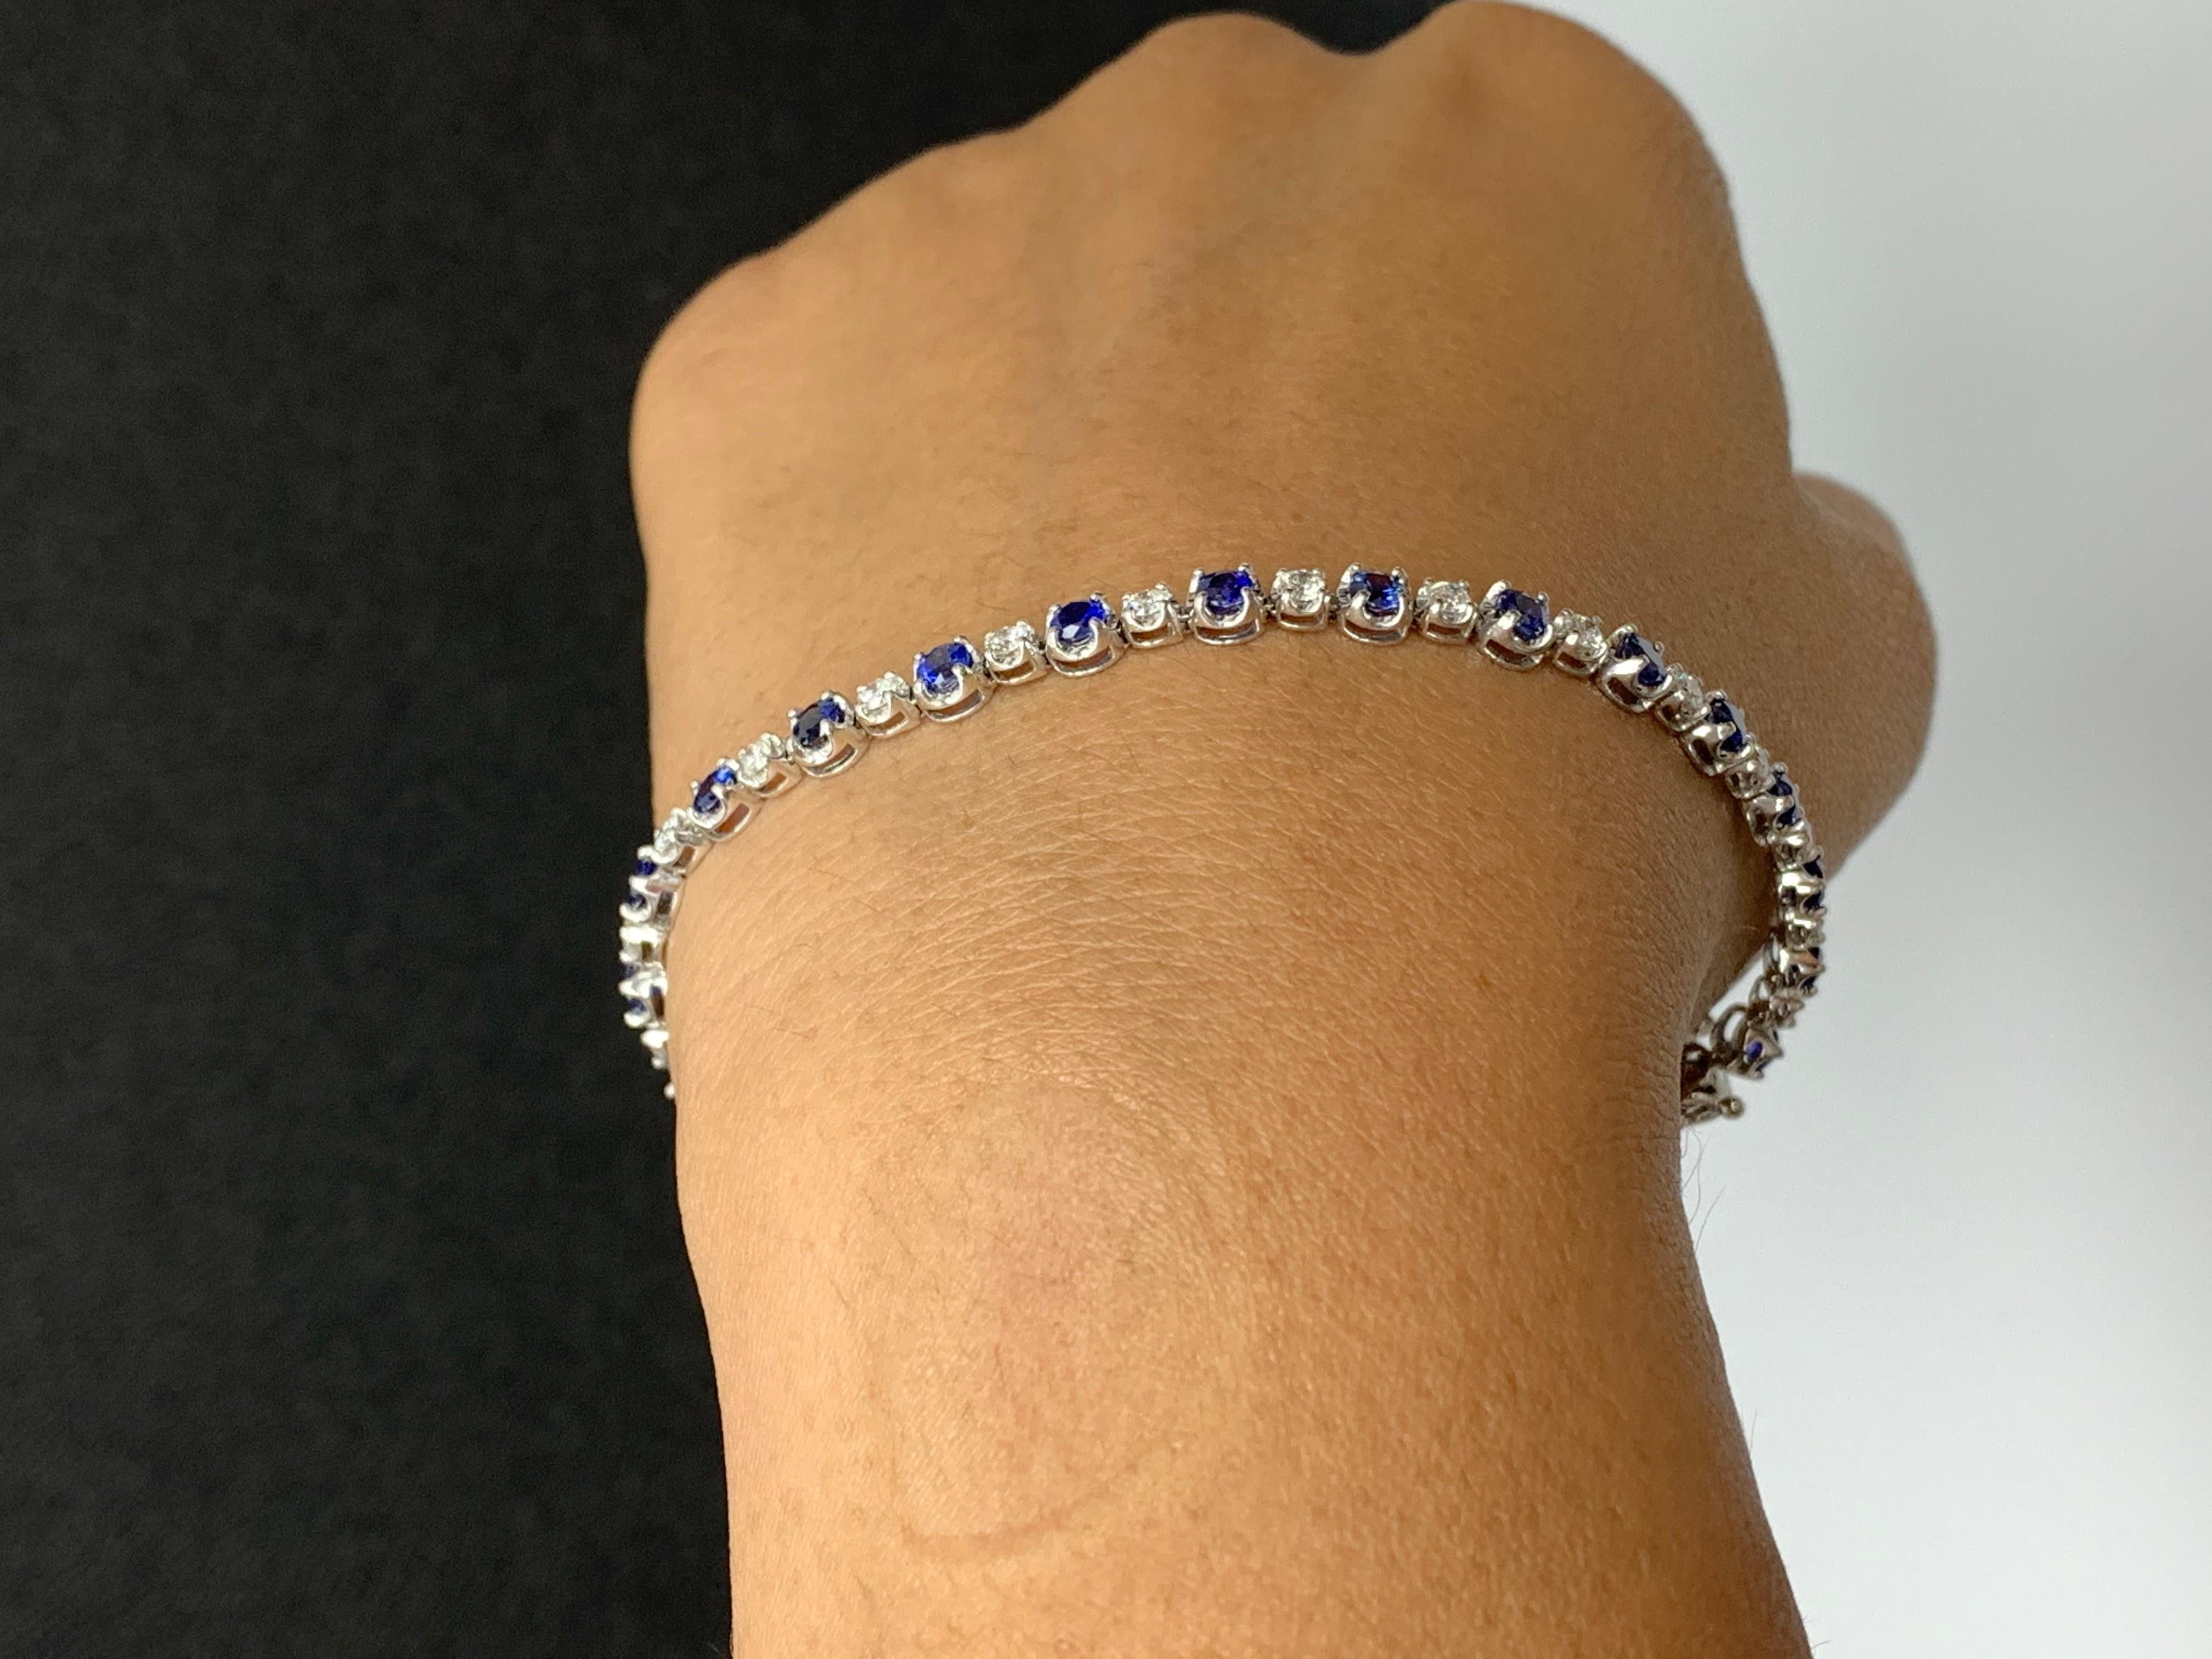 2.96 Carat Round Blue Sapphire and Diamond Bracelet in 14k White Gold For Sale 4